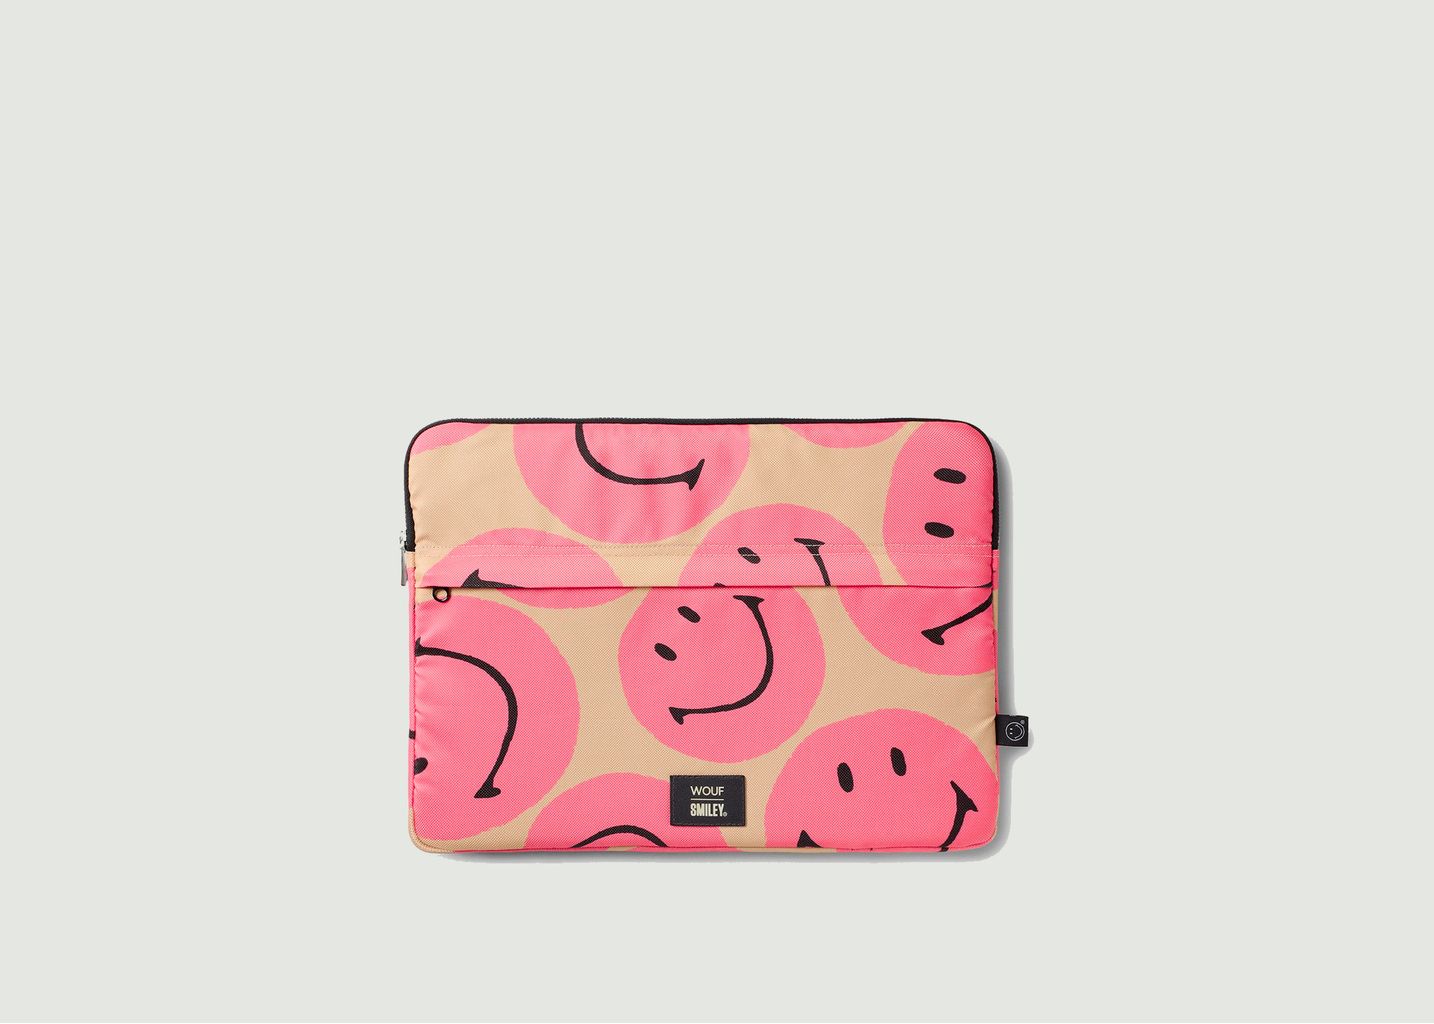 wouf-smiley-pink-laptop-sleeve-13